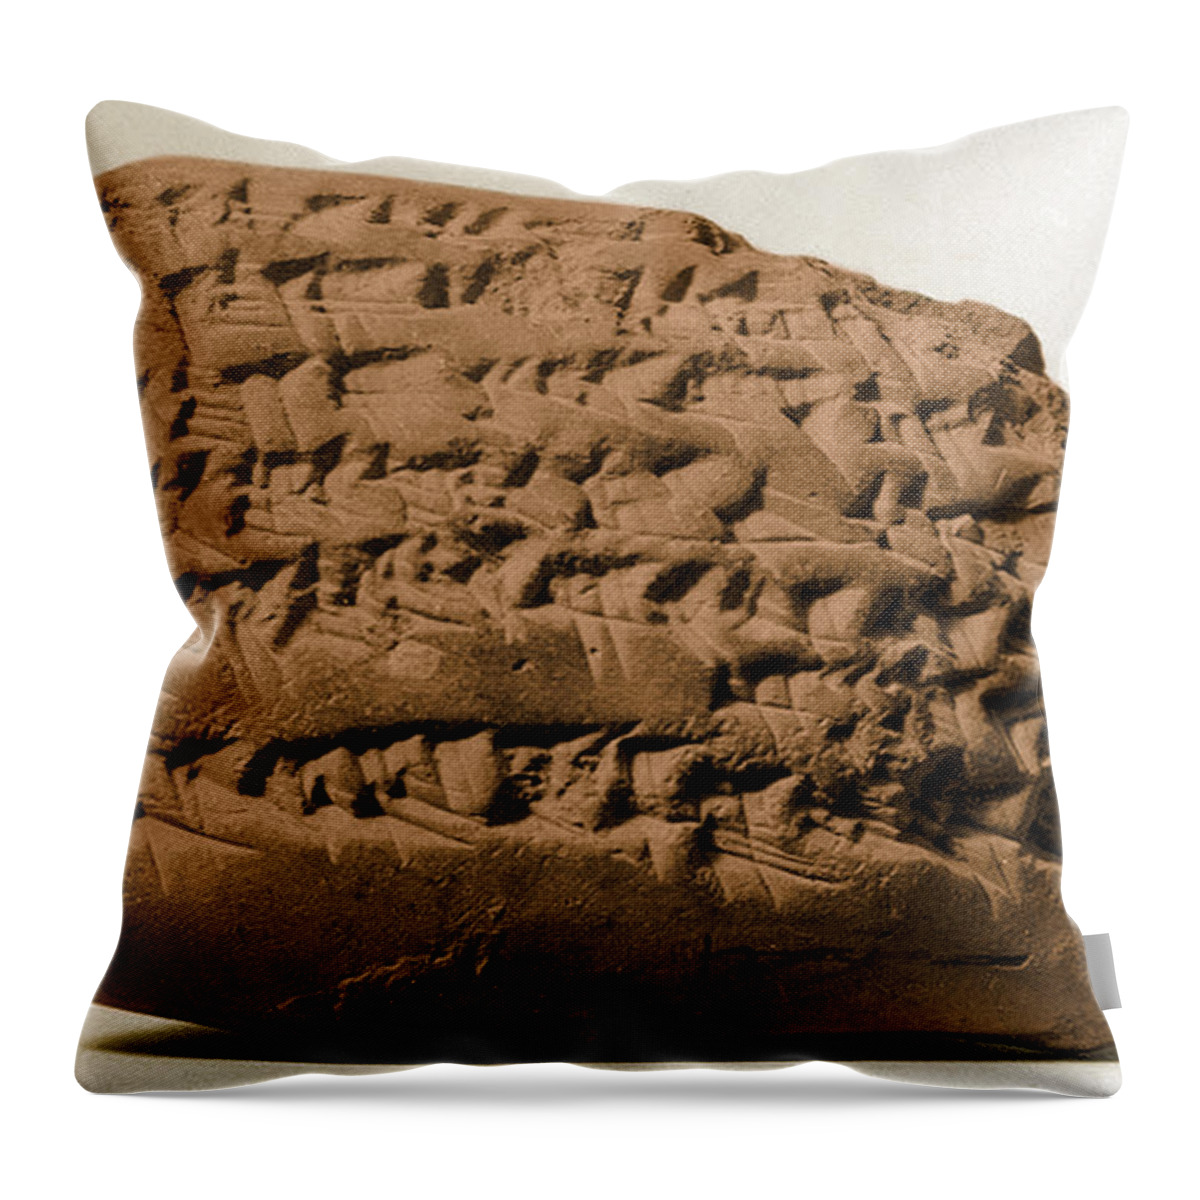 History Throw Pillow featuring the photograph Gula Incantation, Medical Cuneiform by Science Source